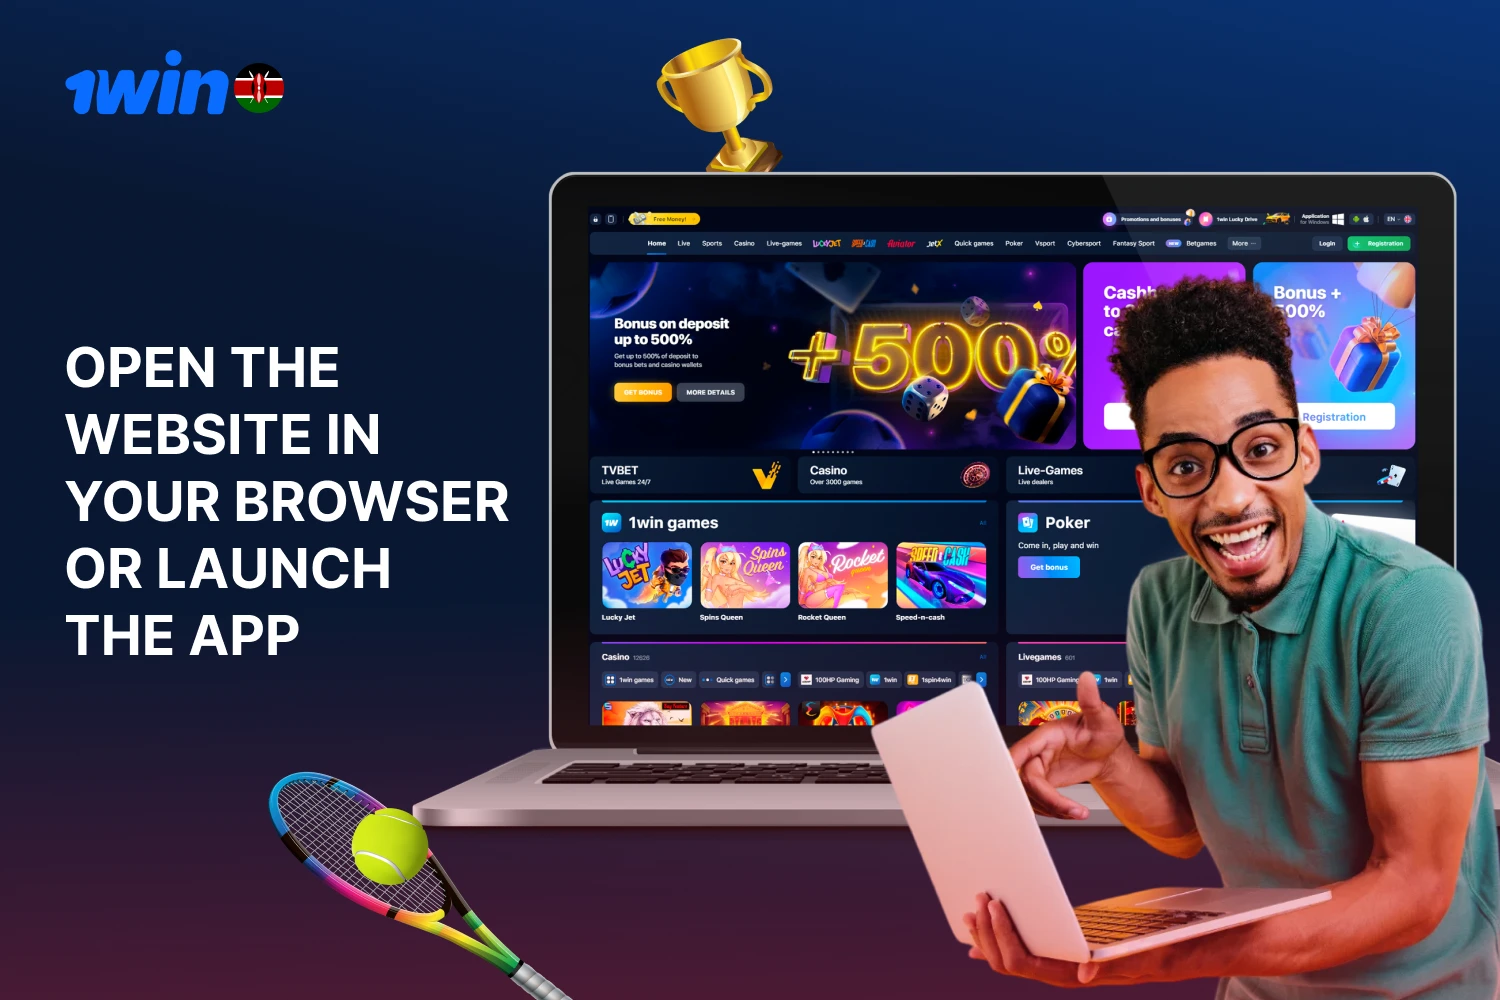 To place a bet, open the website in your browser or launch the 1win Kenya app